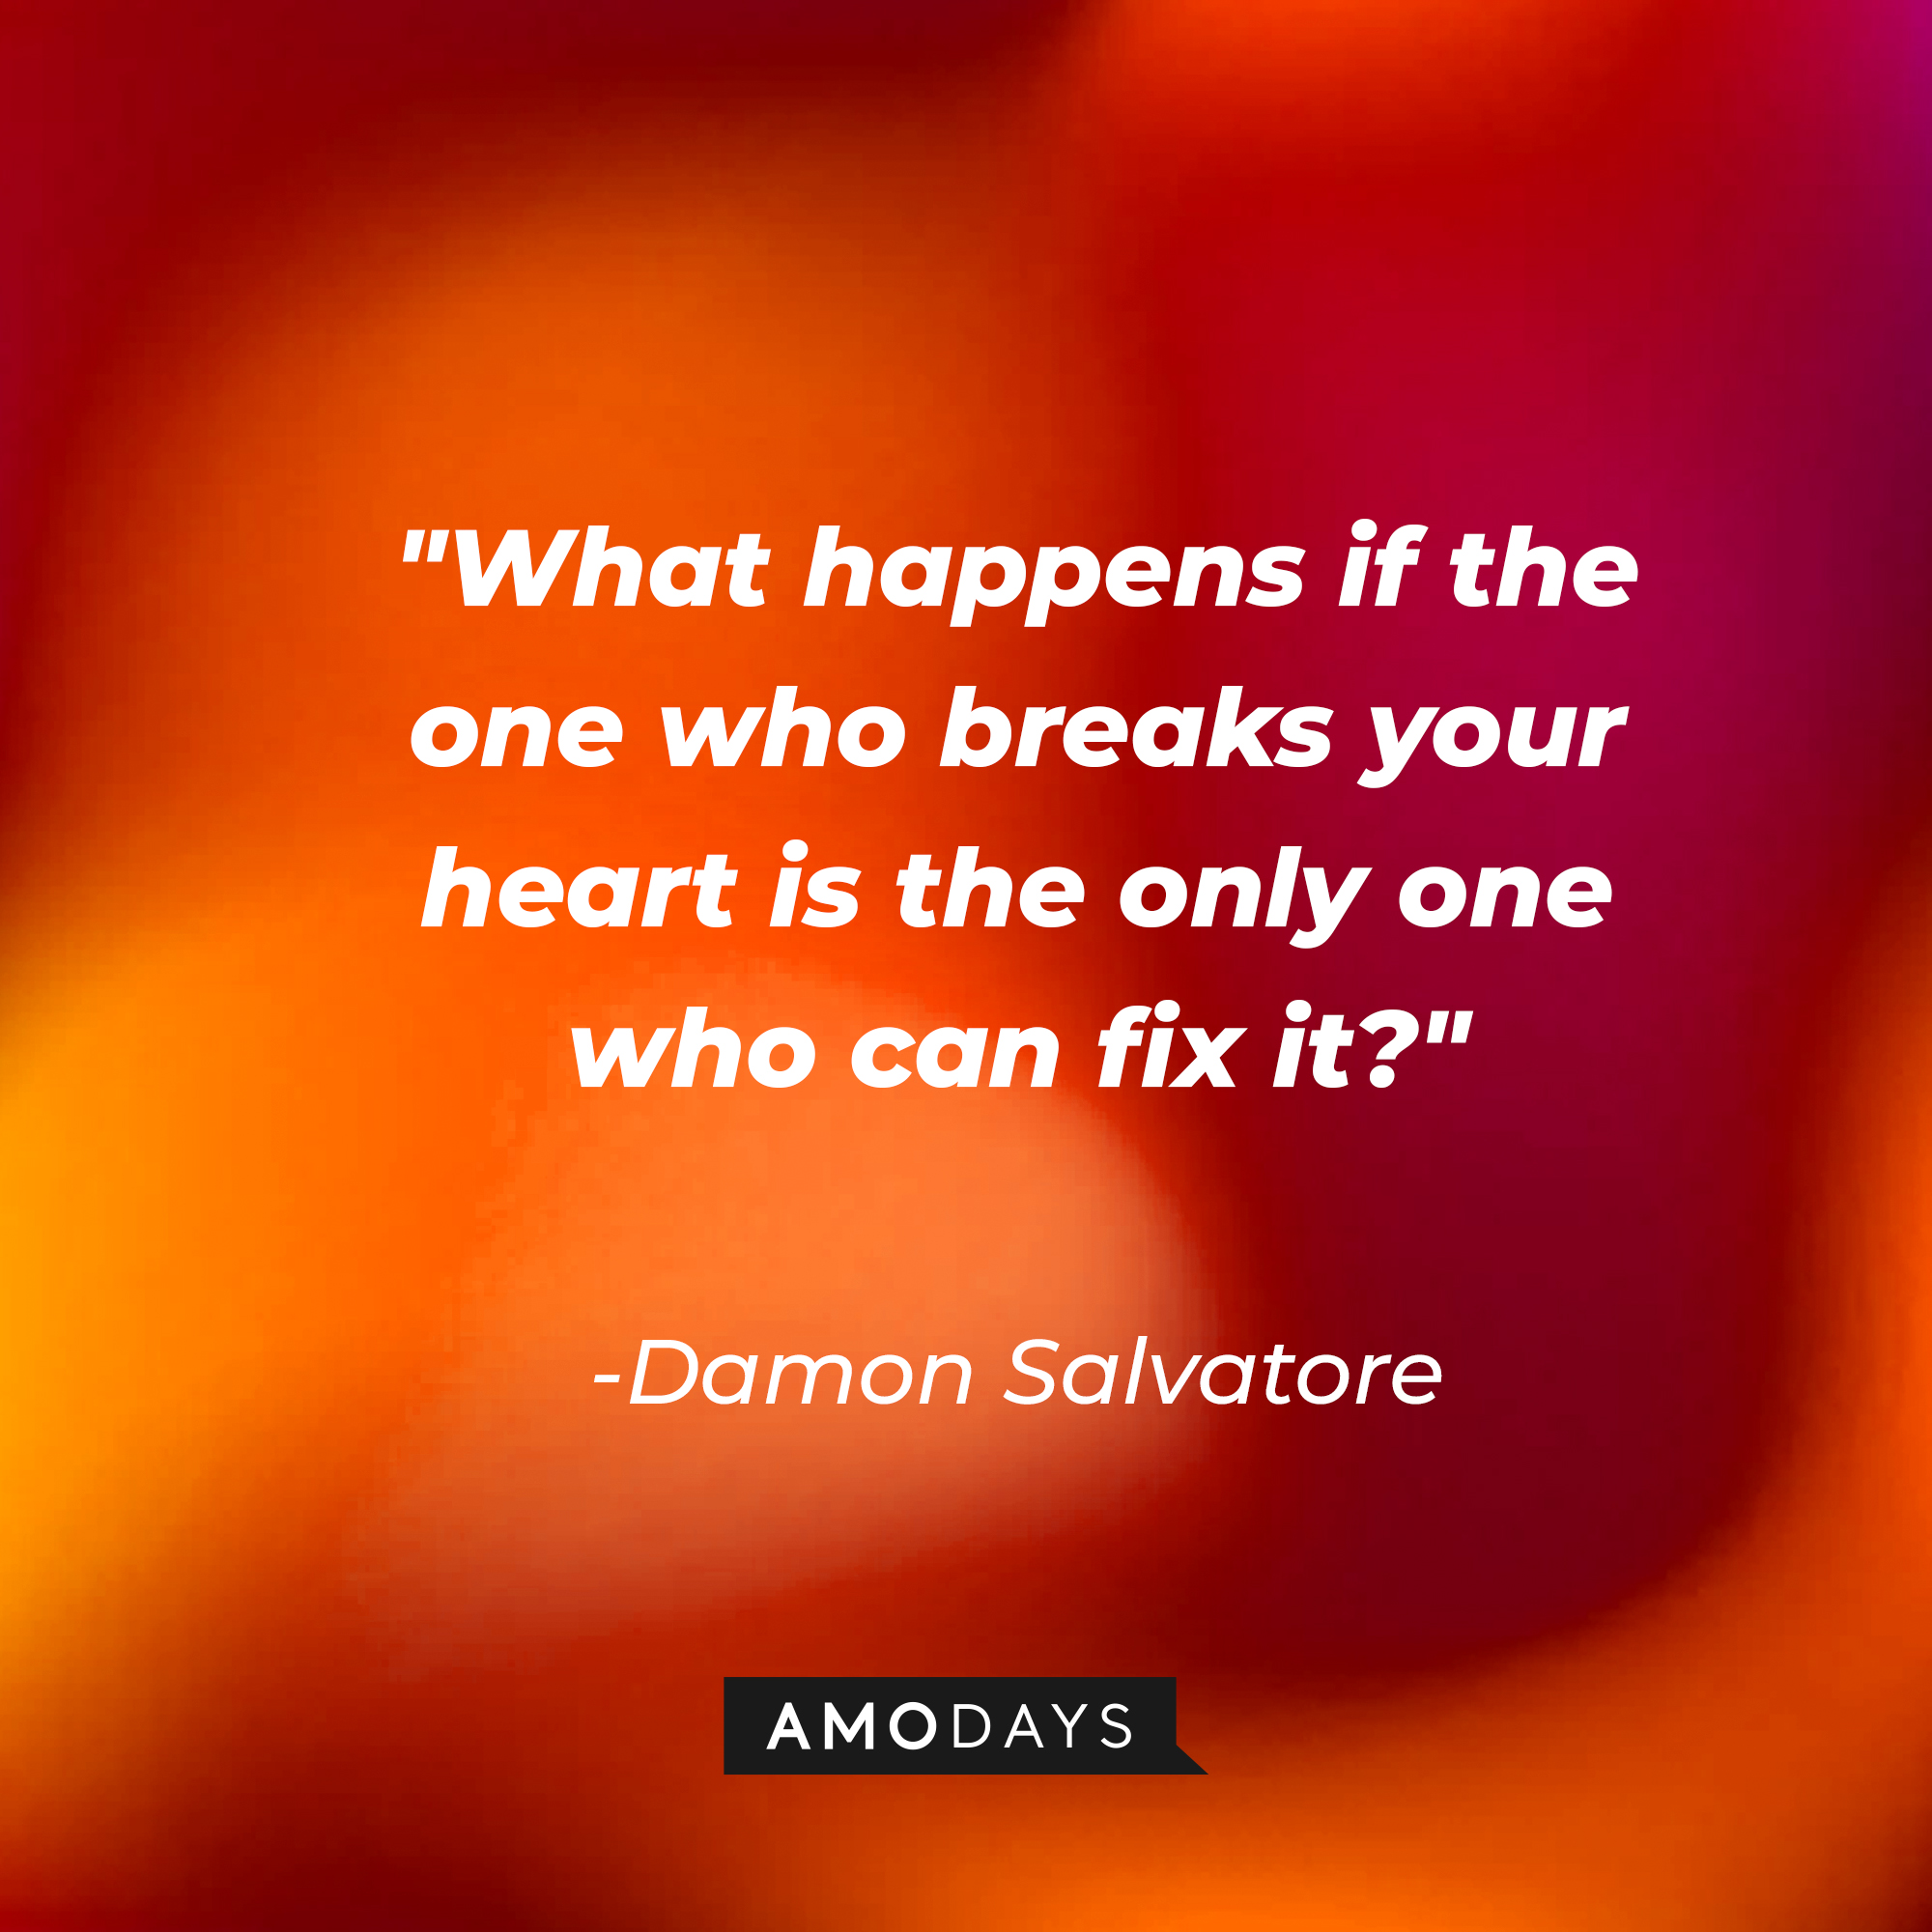 Damon Salvatore's quote: "What happens if the one who breaks your heart is the only one who can fix it?" | Source: Amodays